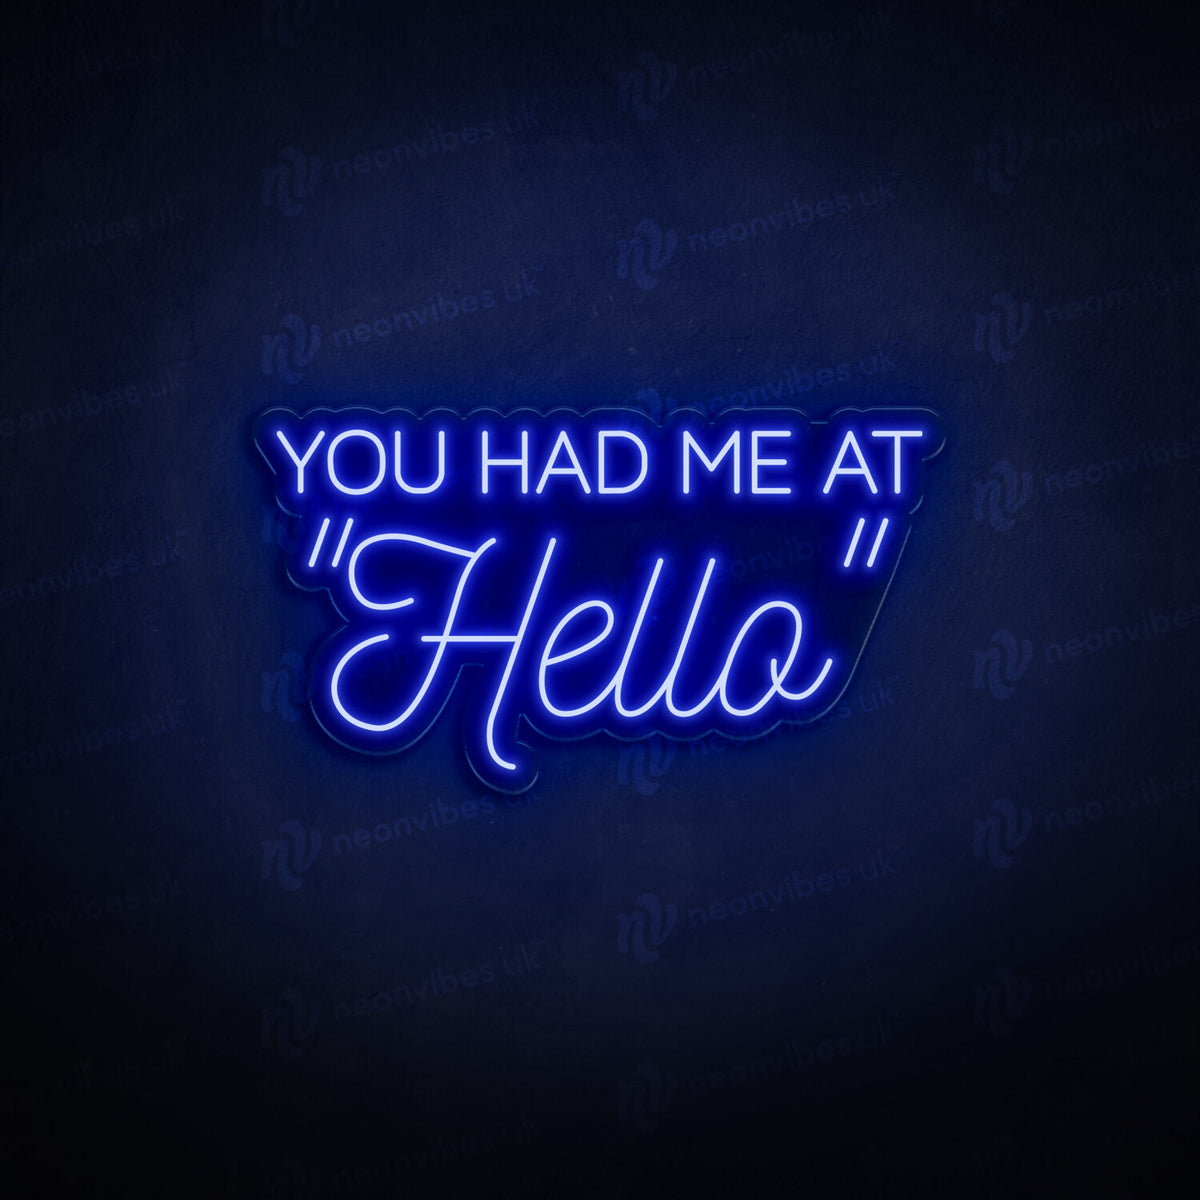 You had me at hello neon sign